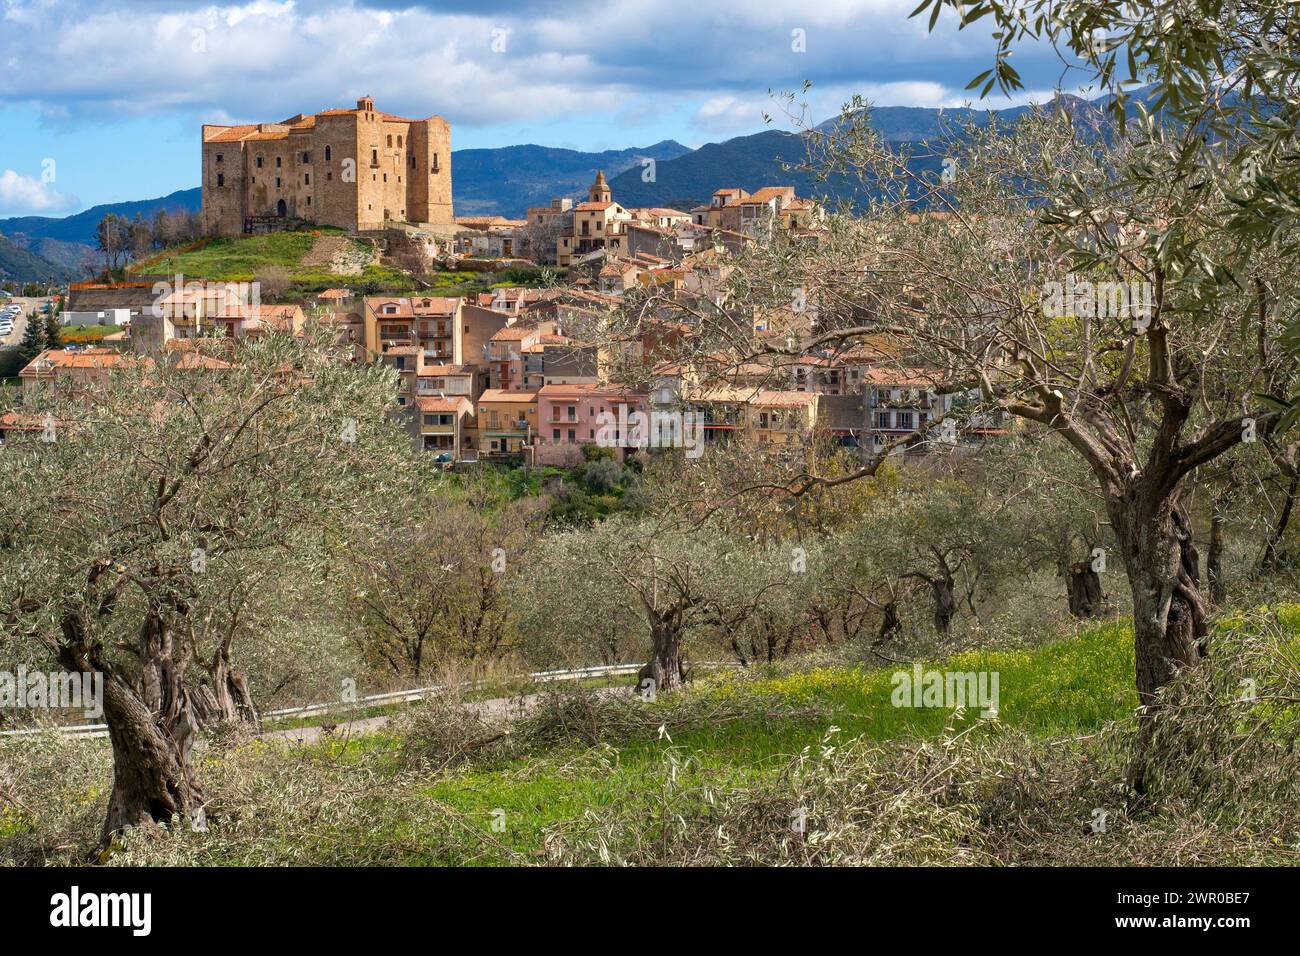 Famous castle and city of Castelbuono on the italian island of Sicily Stock Photo